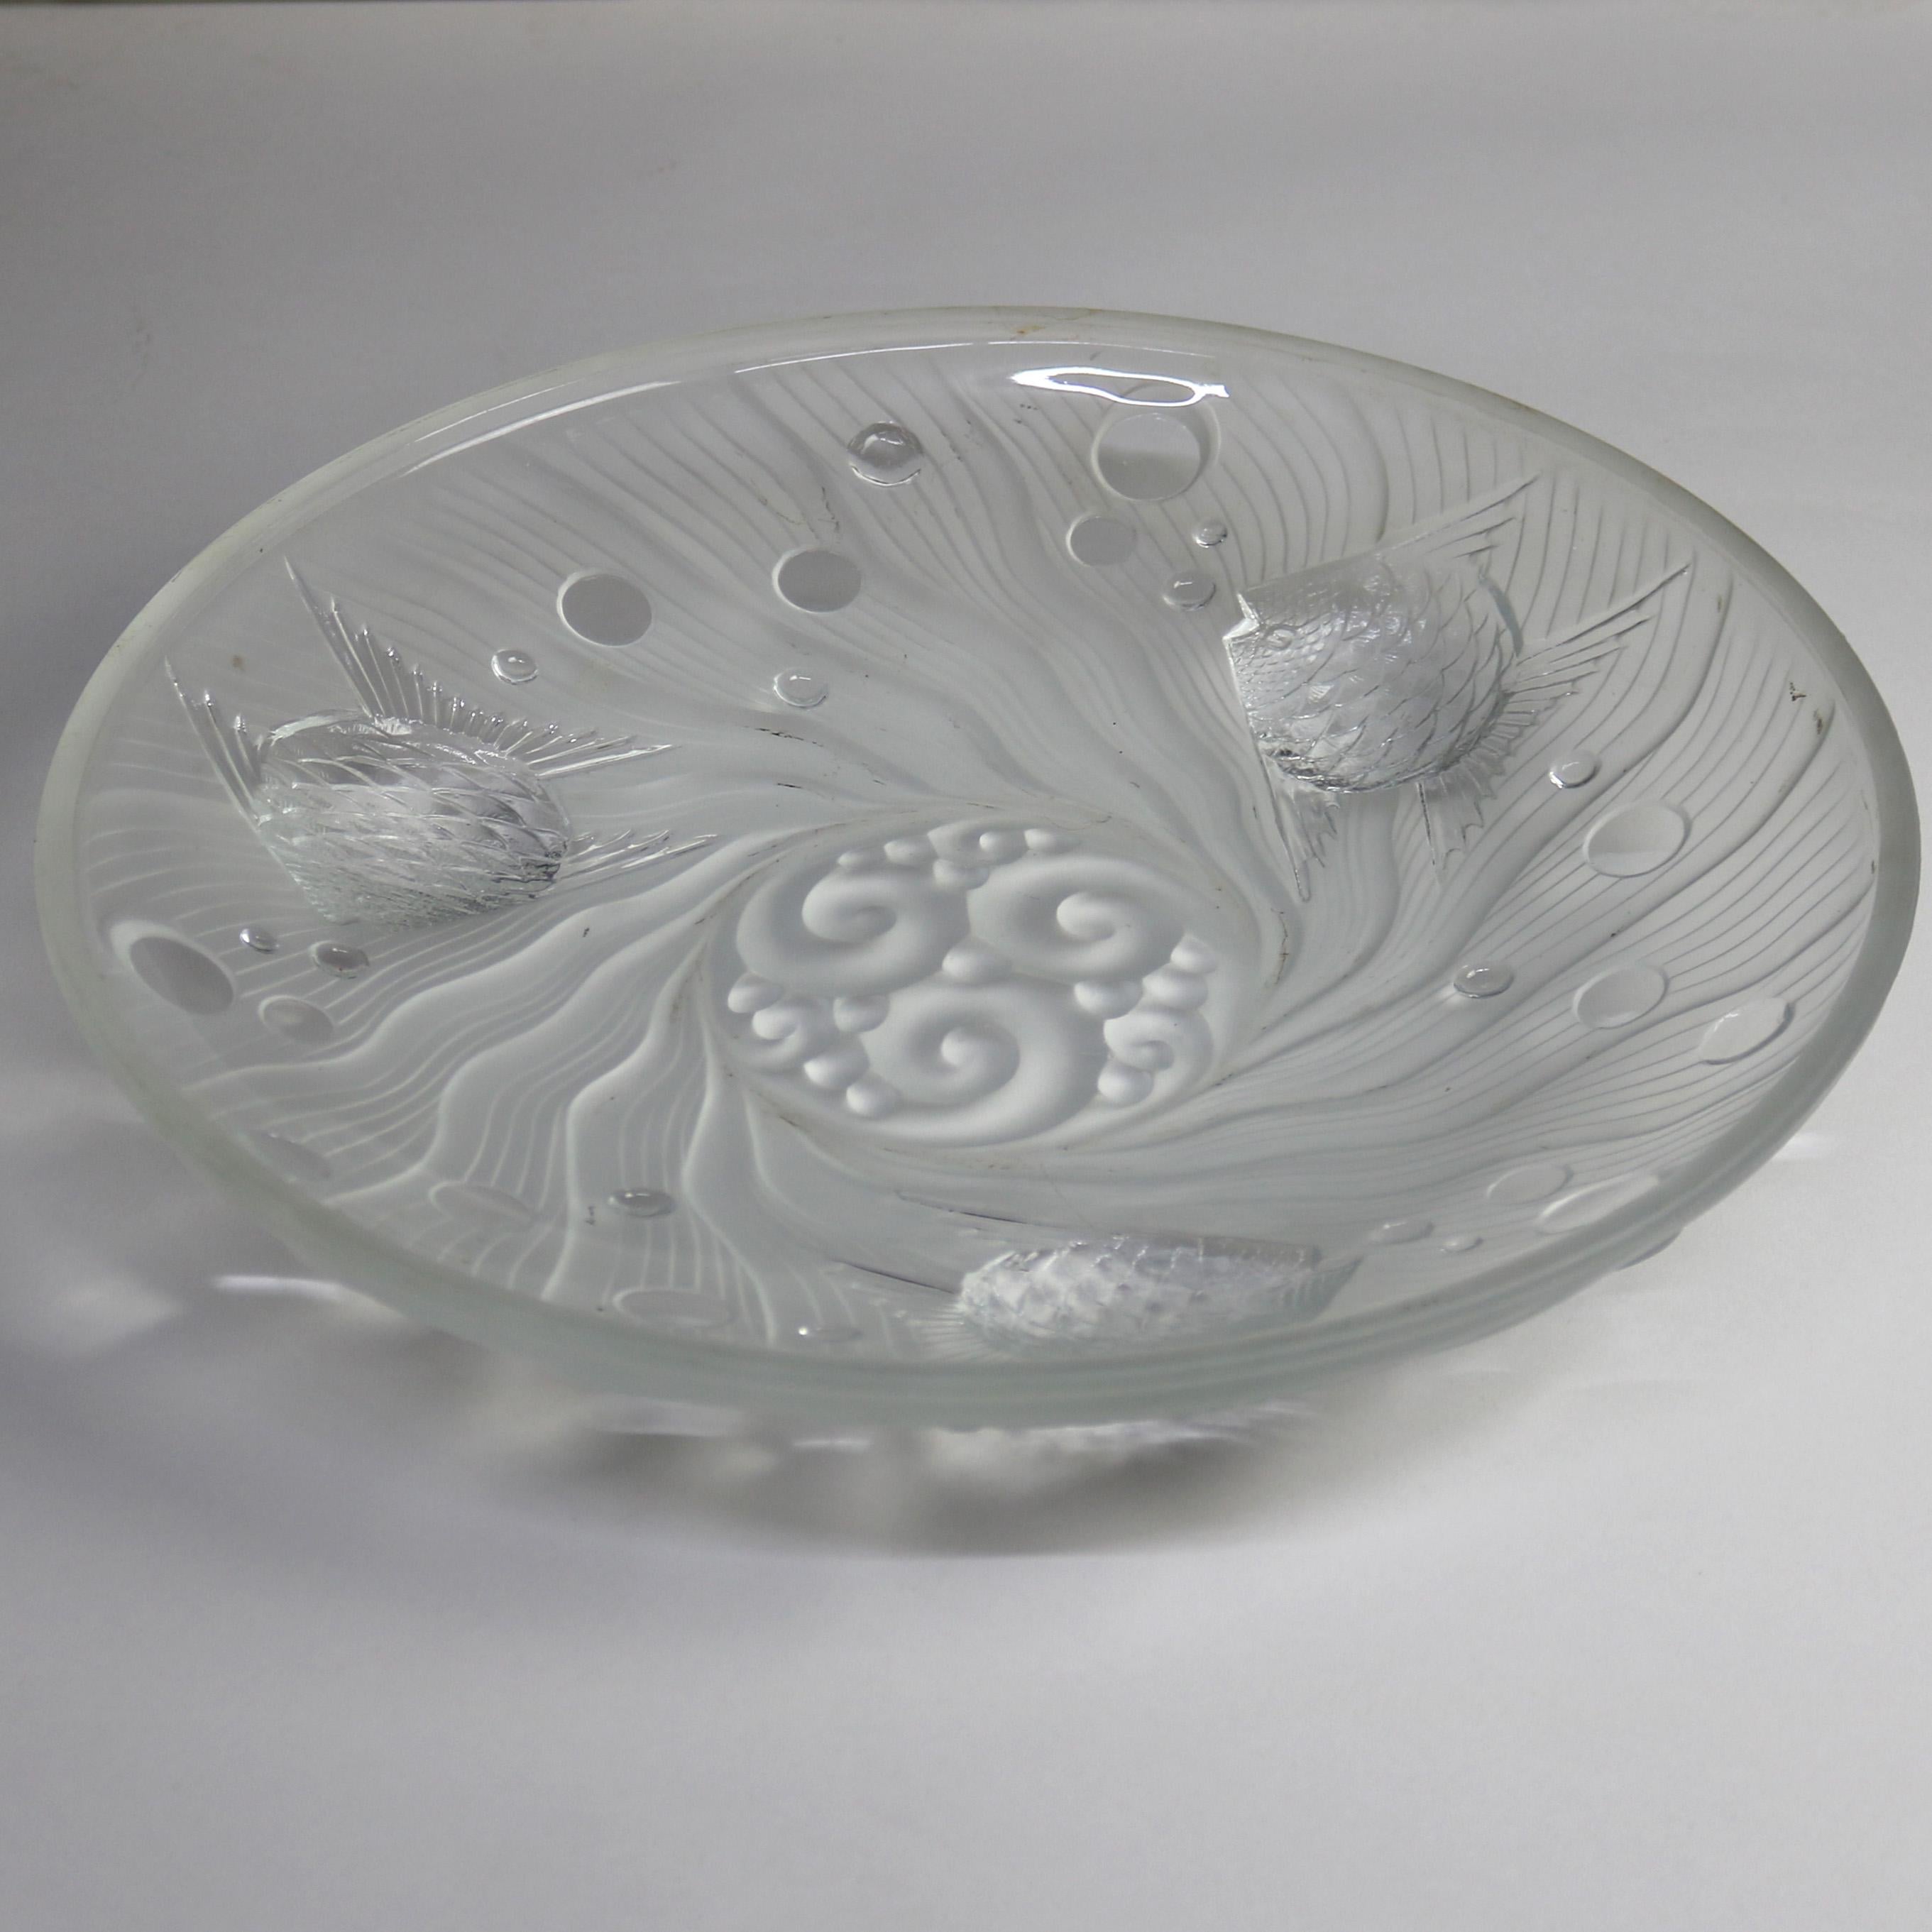 20th Century French Lalique School Art Glass Center Bowl with Goldfish, 20th C